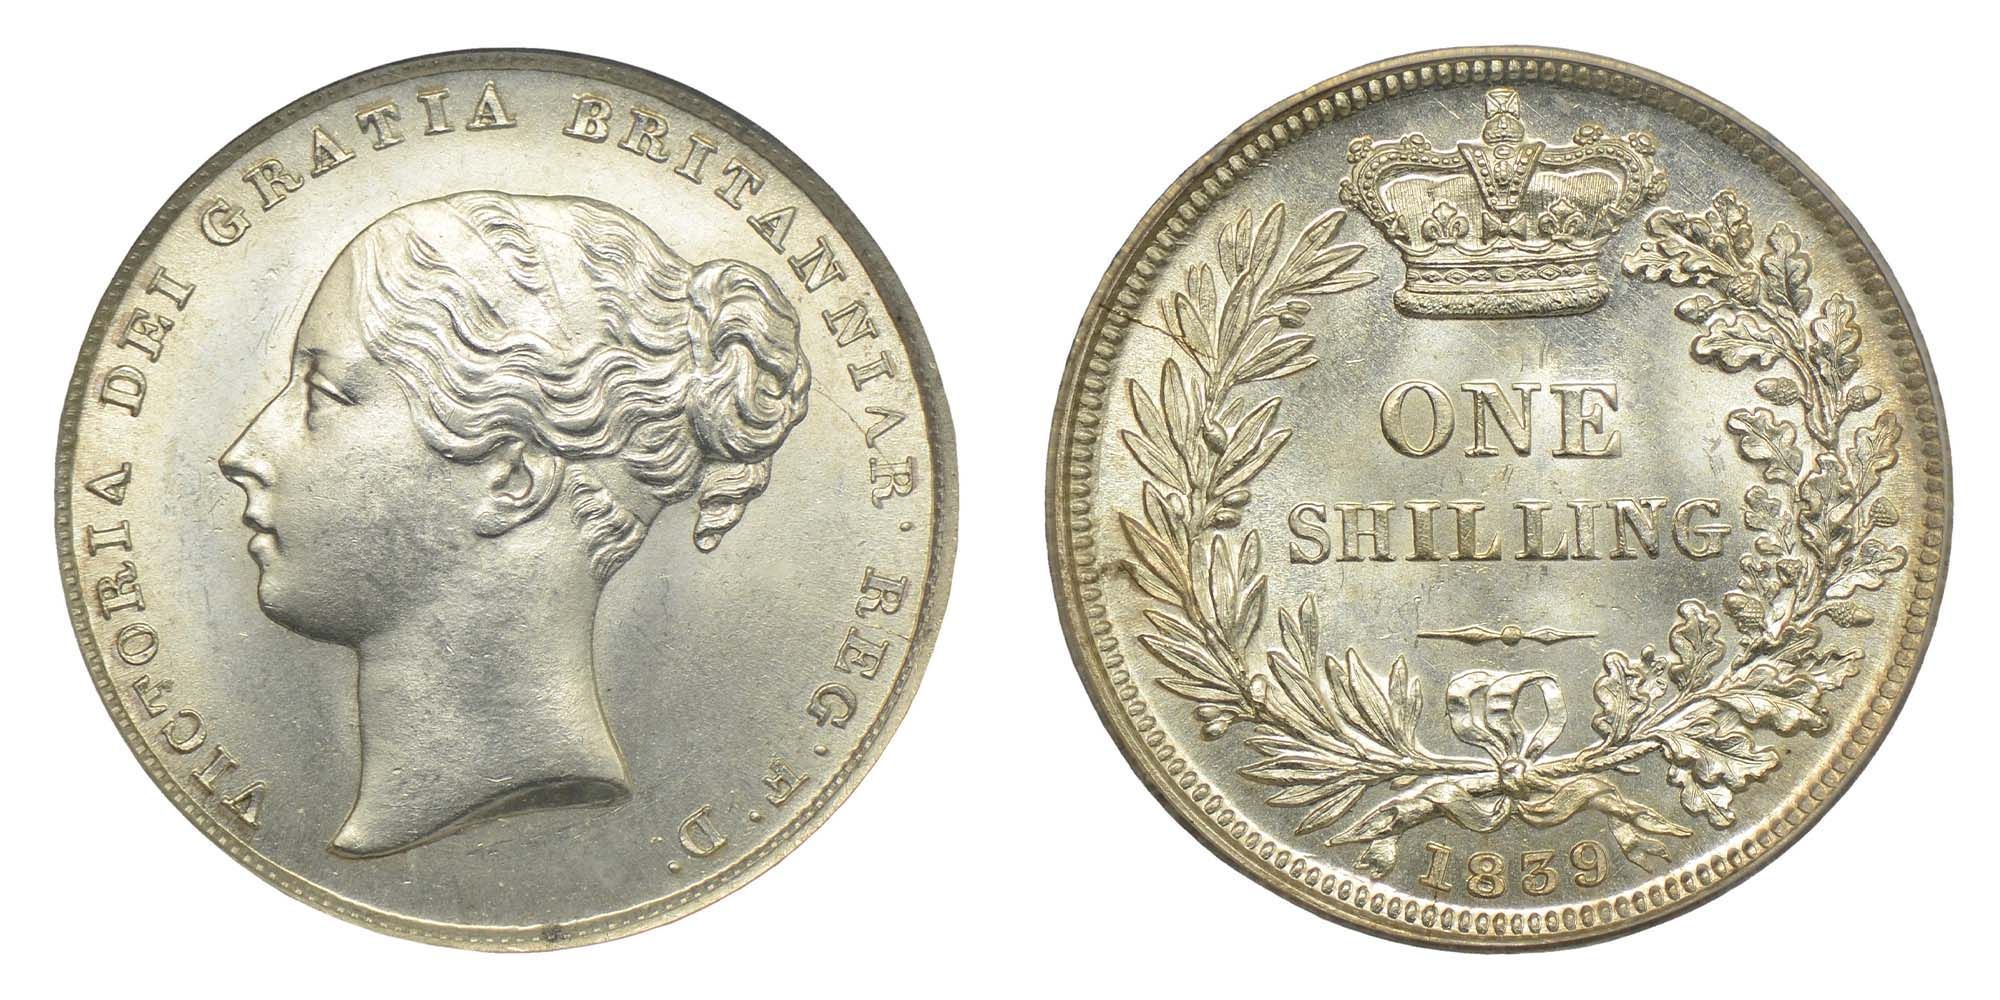 Victoria Silver Shilling 1839 Presumed rare with the stated obverse die errors